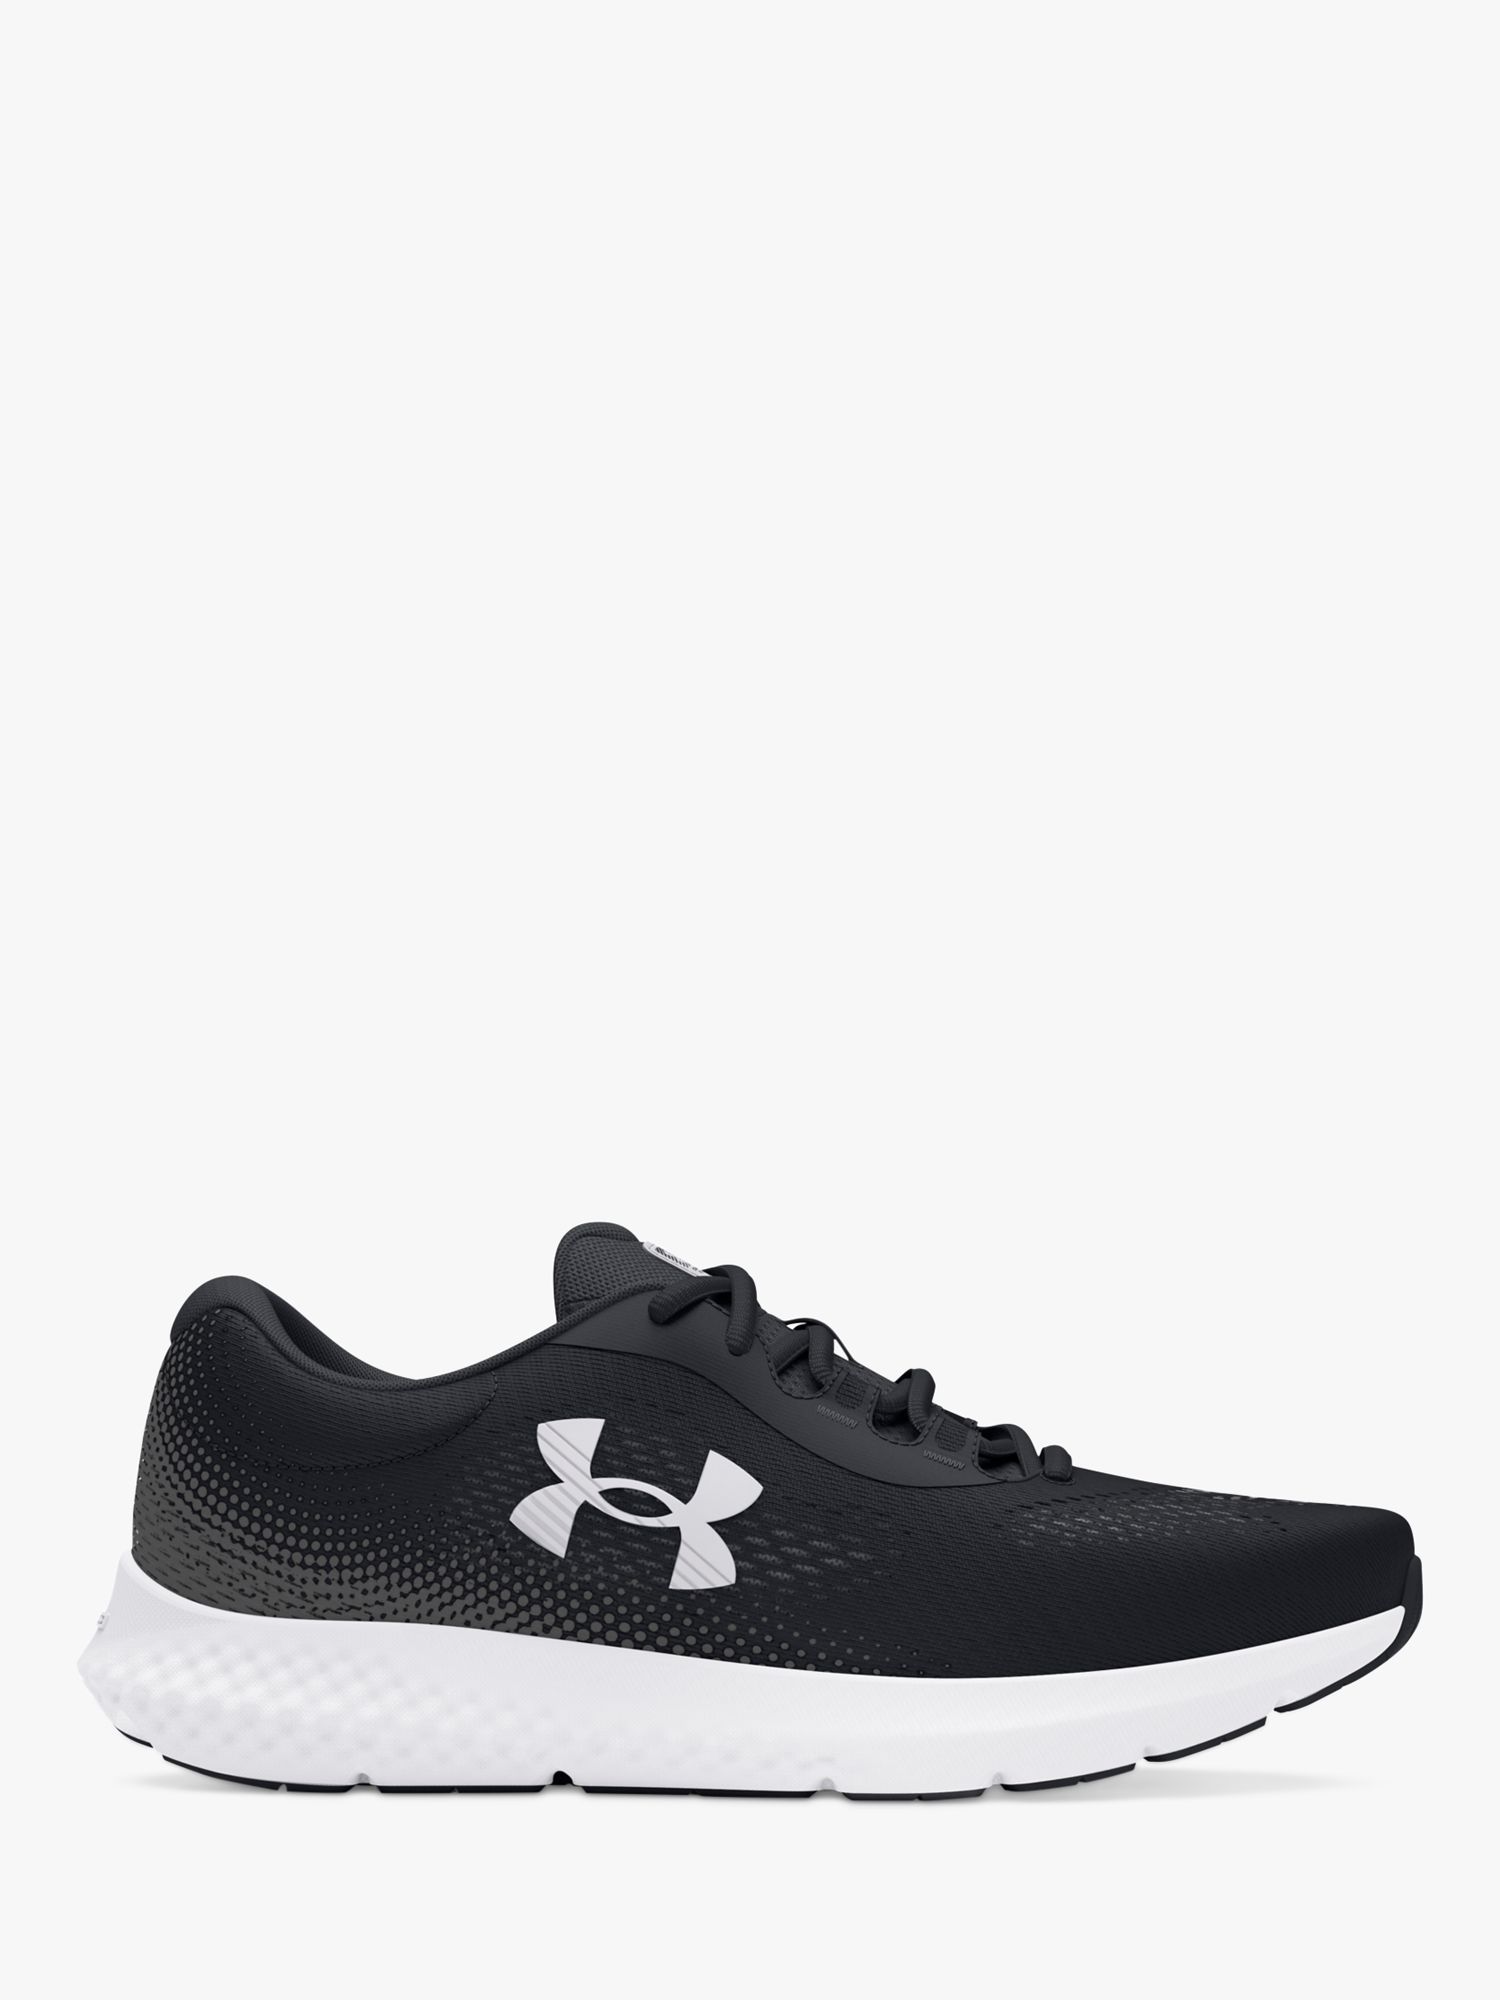 Under Armour Rogue 4 Women's Running Shoes, Black / White at John Lewis ...